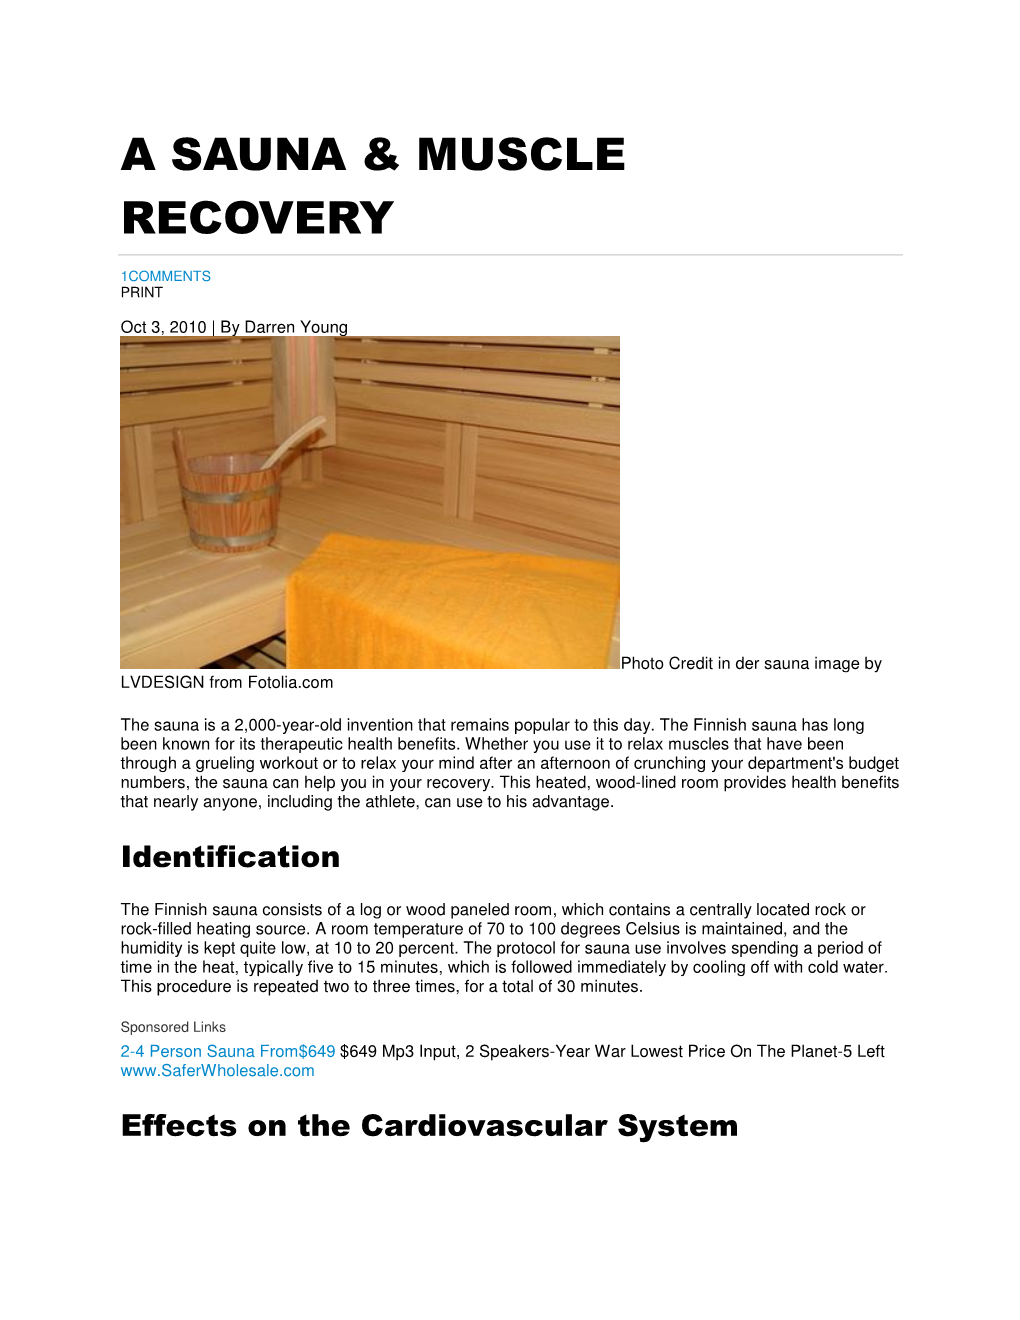 A Sauna & Muscle Recovery